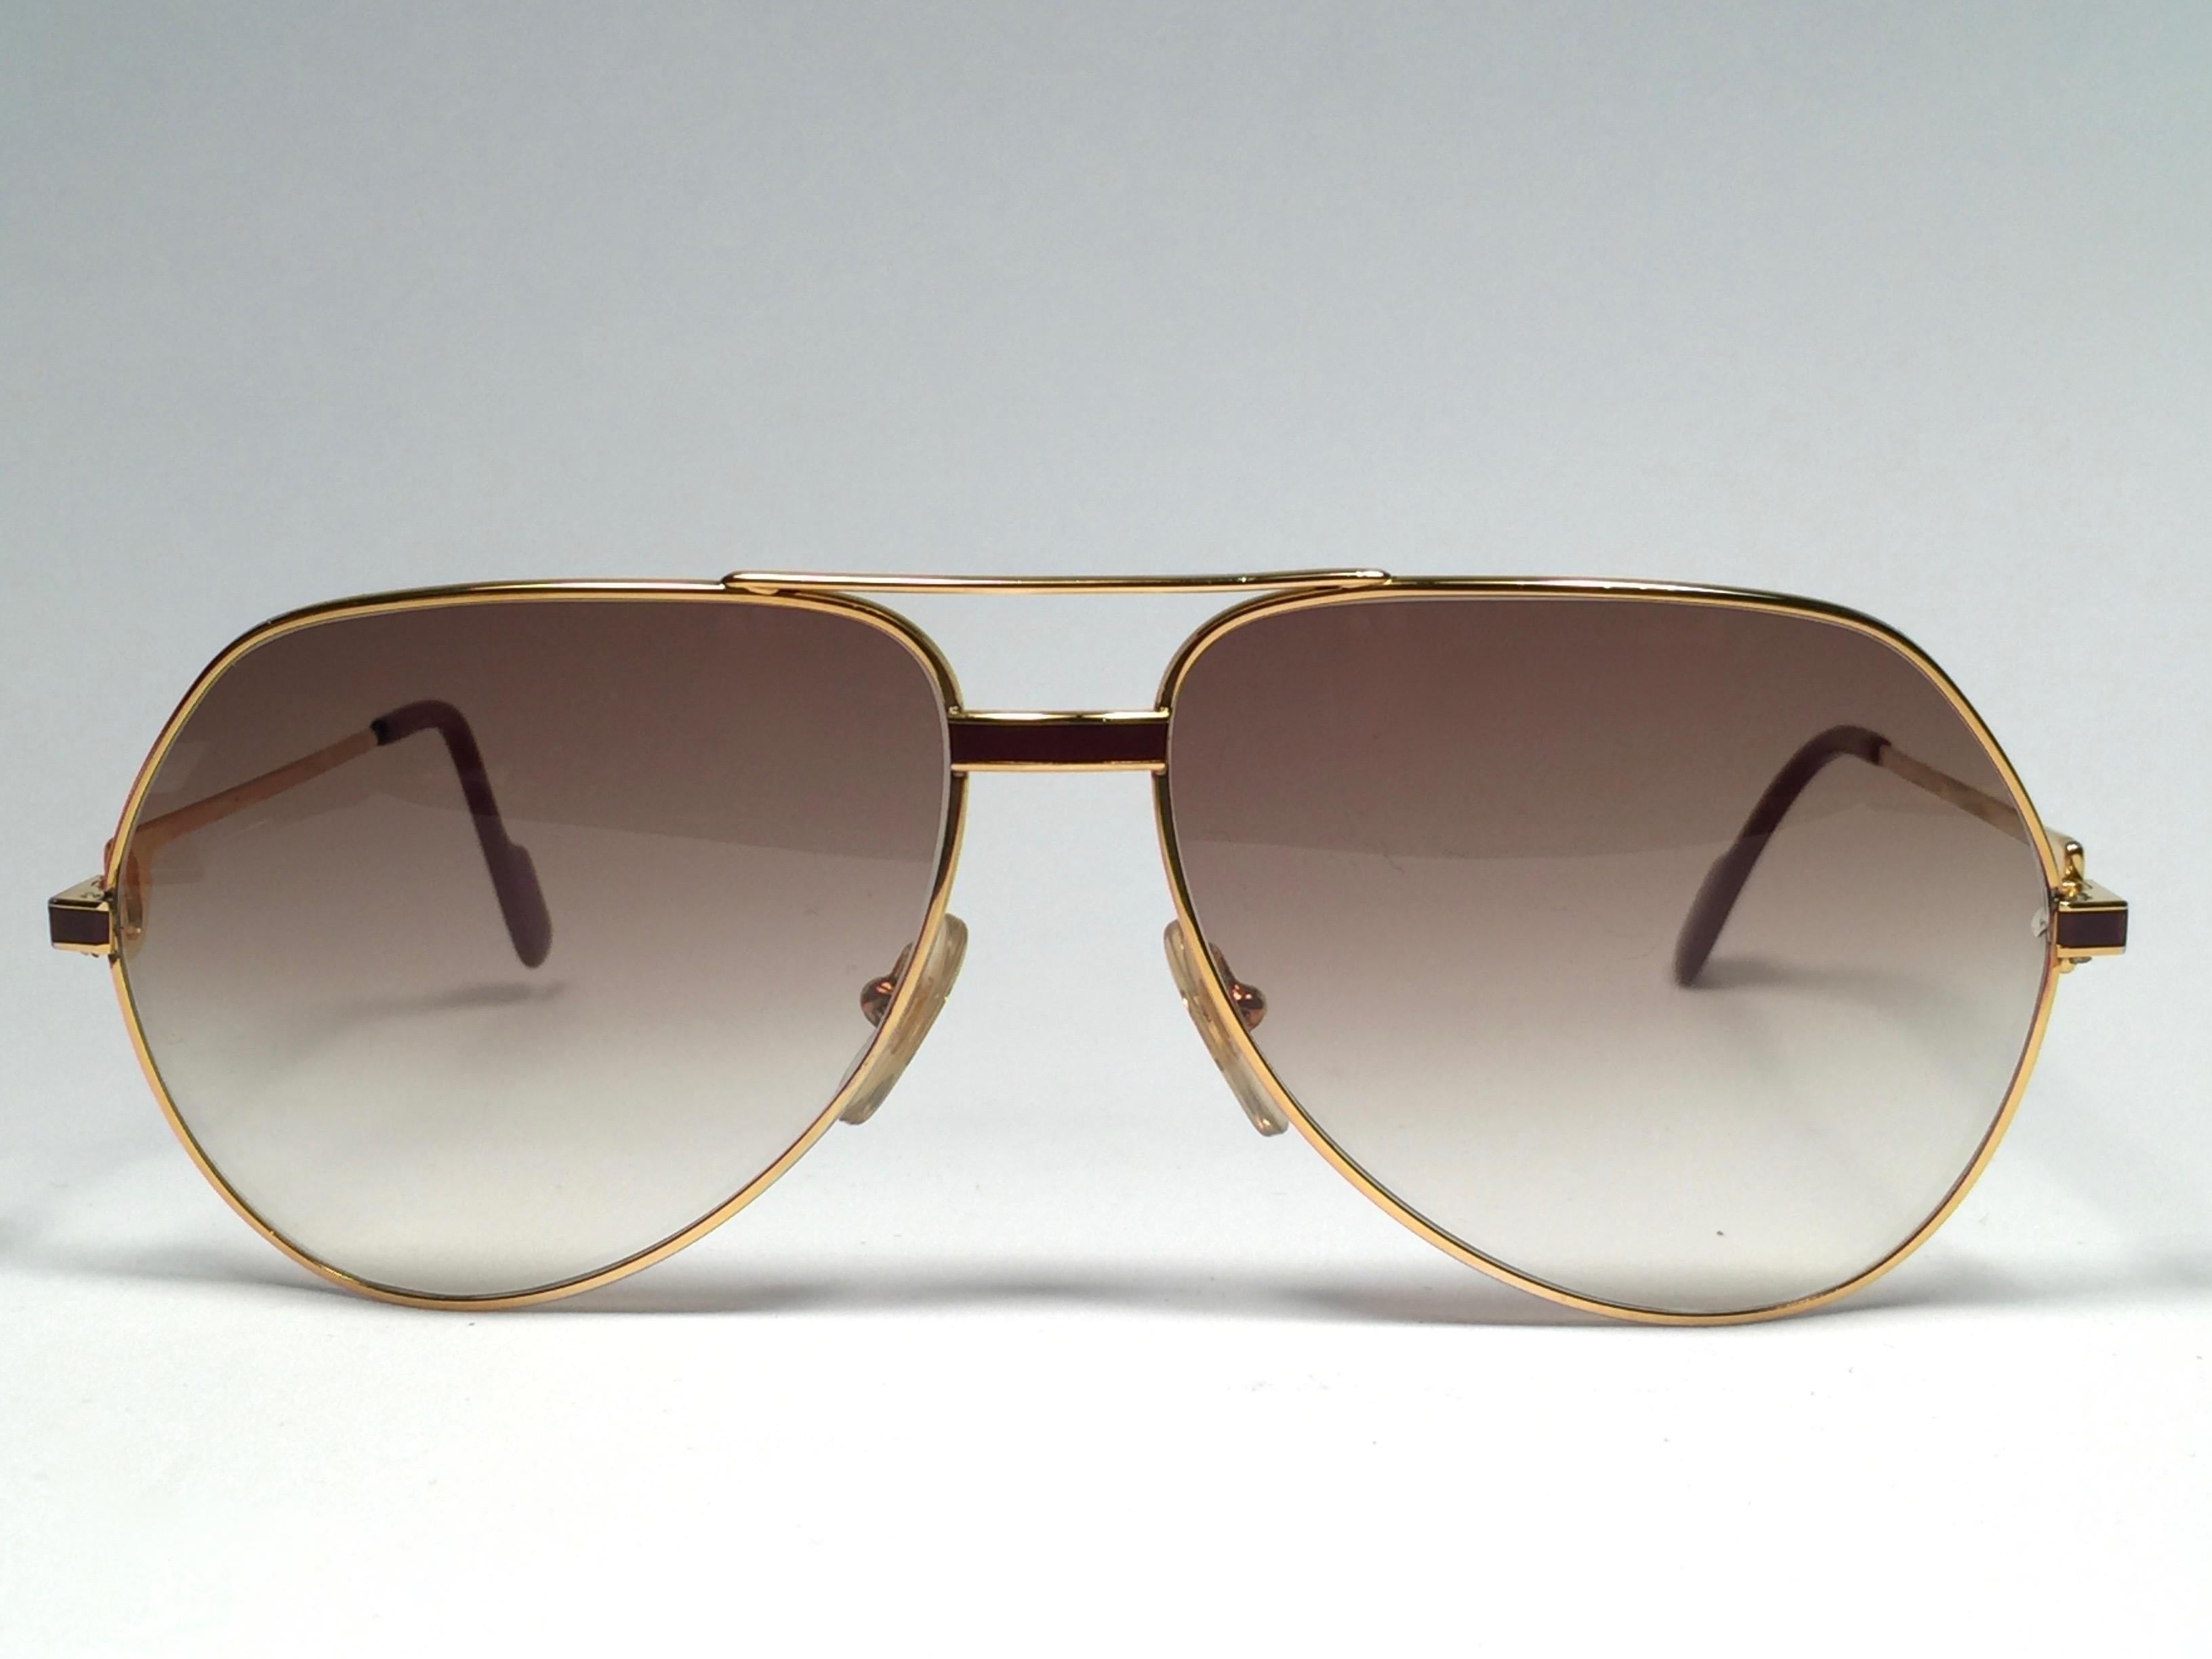 New Cartier Laque de Chine Aviator Gold 62Mm Heavy Plated Sunglasses France In New Condition For Sale In Baleares, Baleares